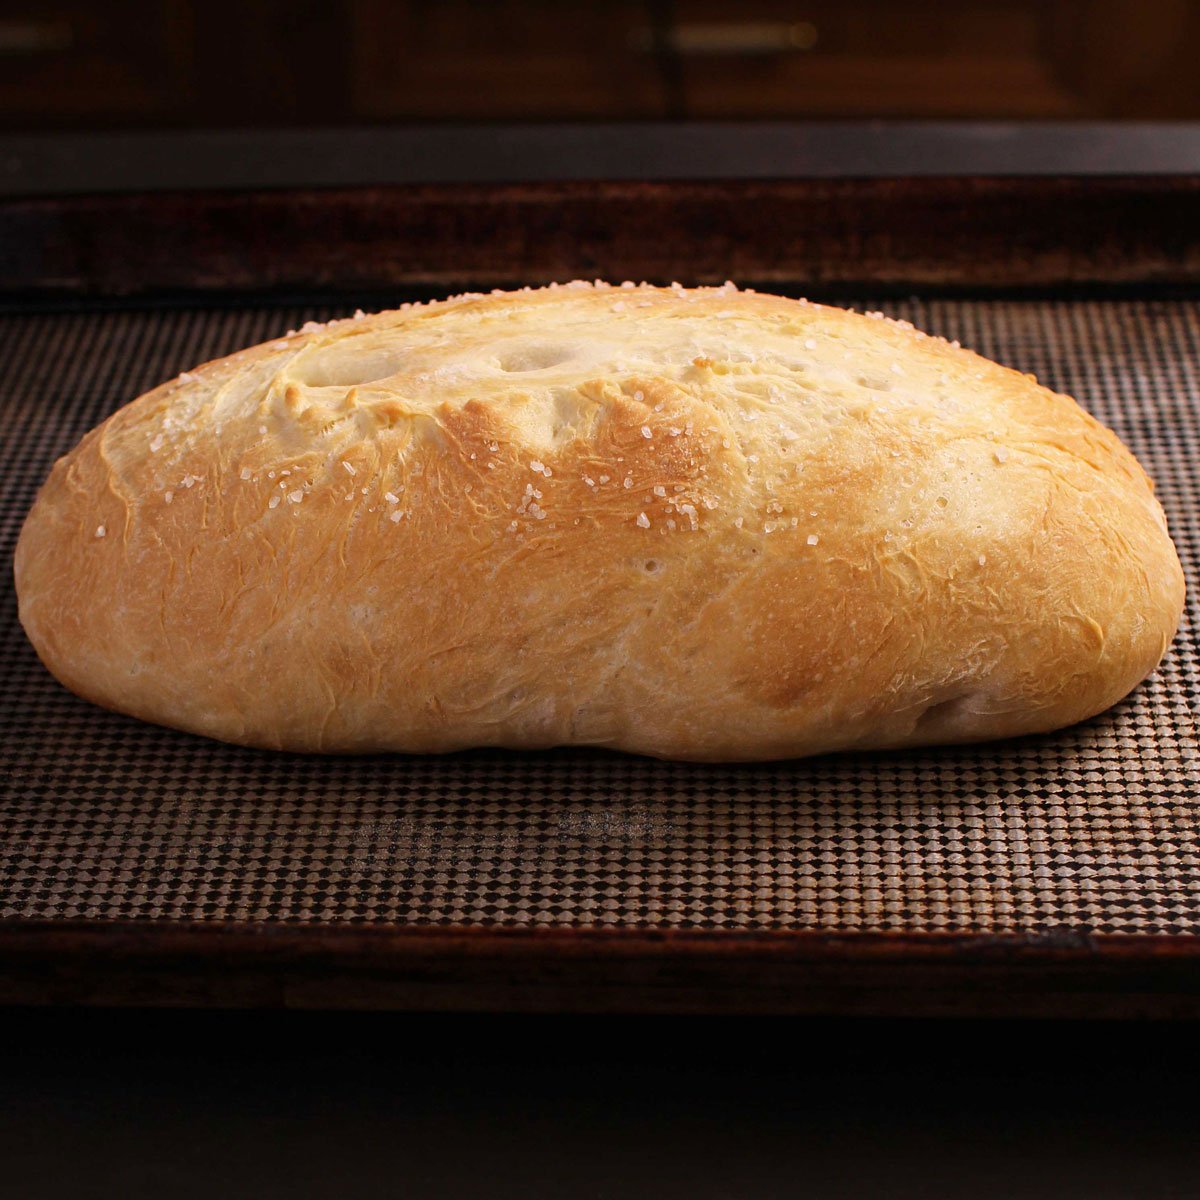 https://onedishkitchen.com/wp-content/uploads/2020/06/french-bread-small-loaf-side-view-one-dish-kitchen-sq-1200.jpg